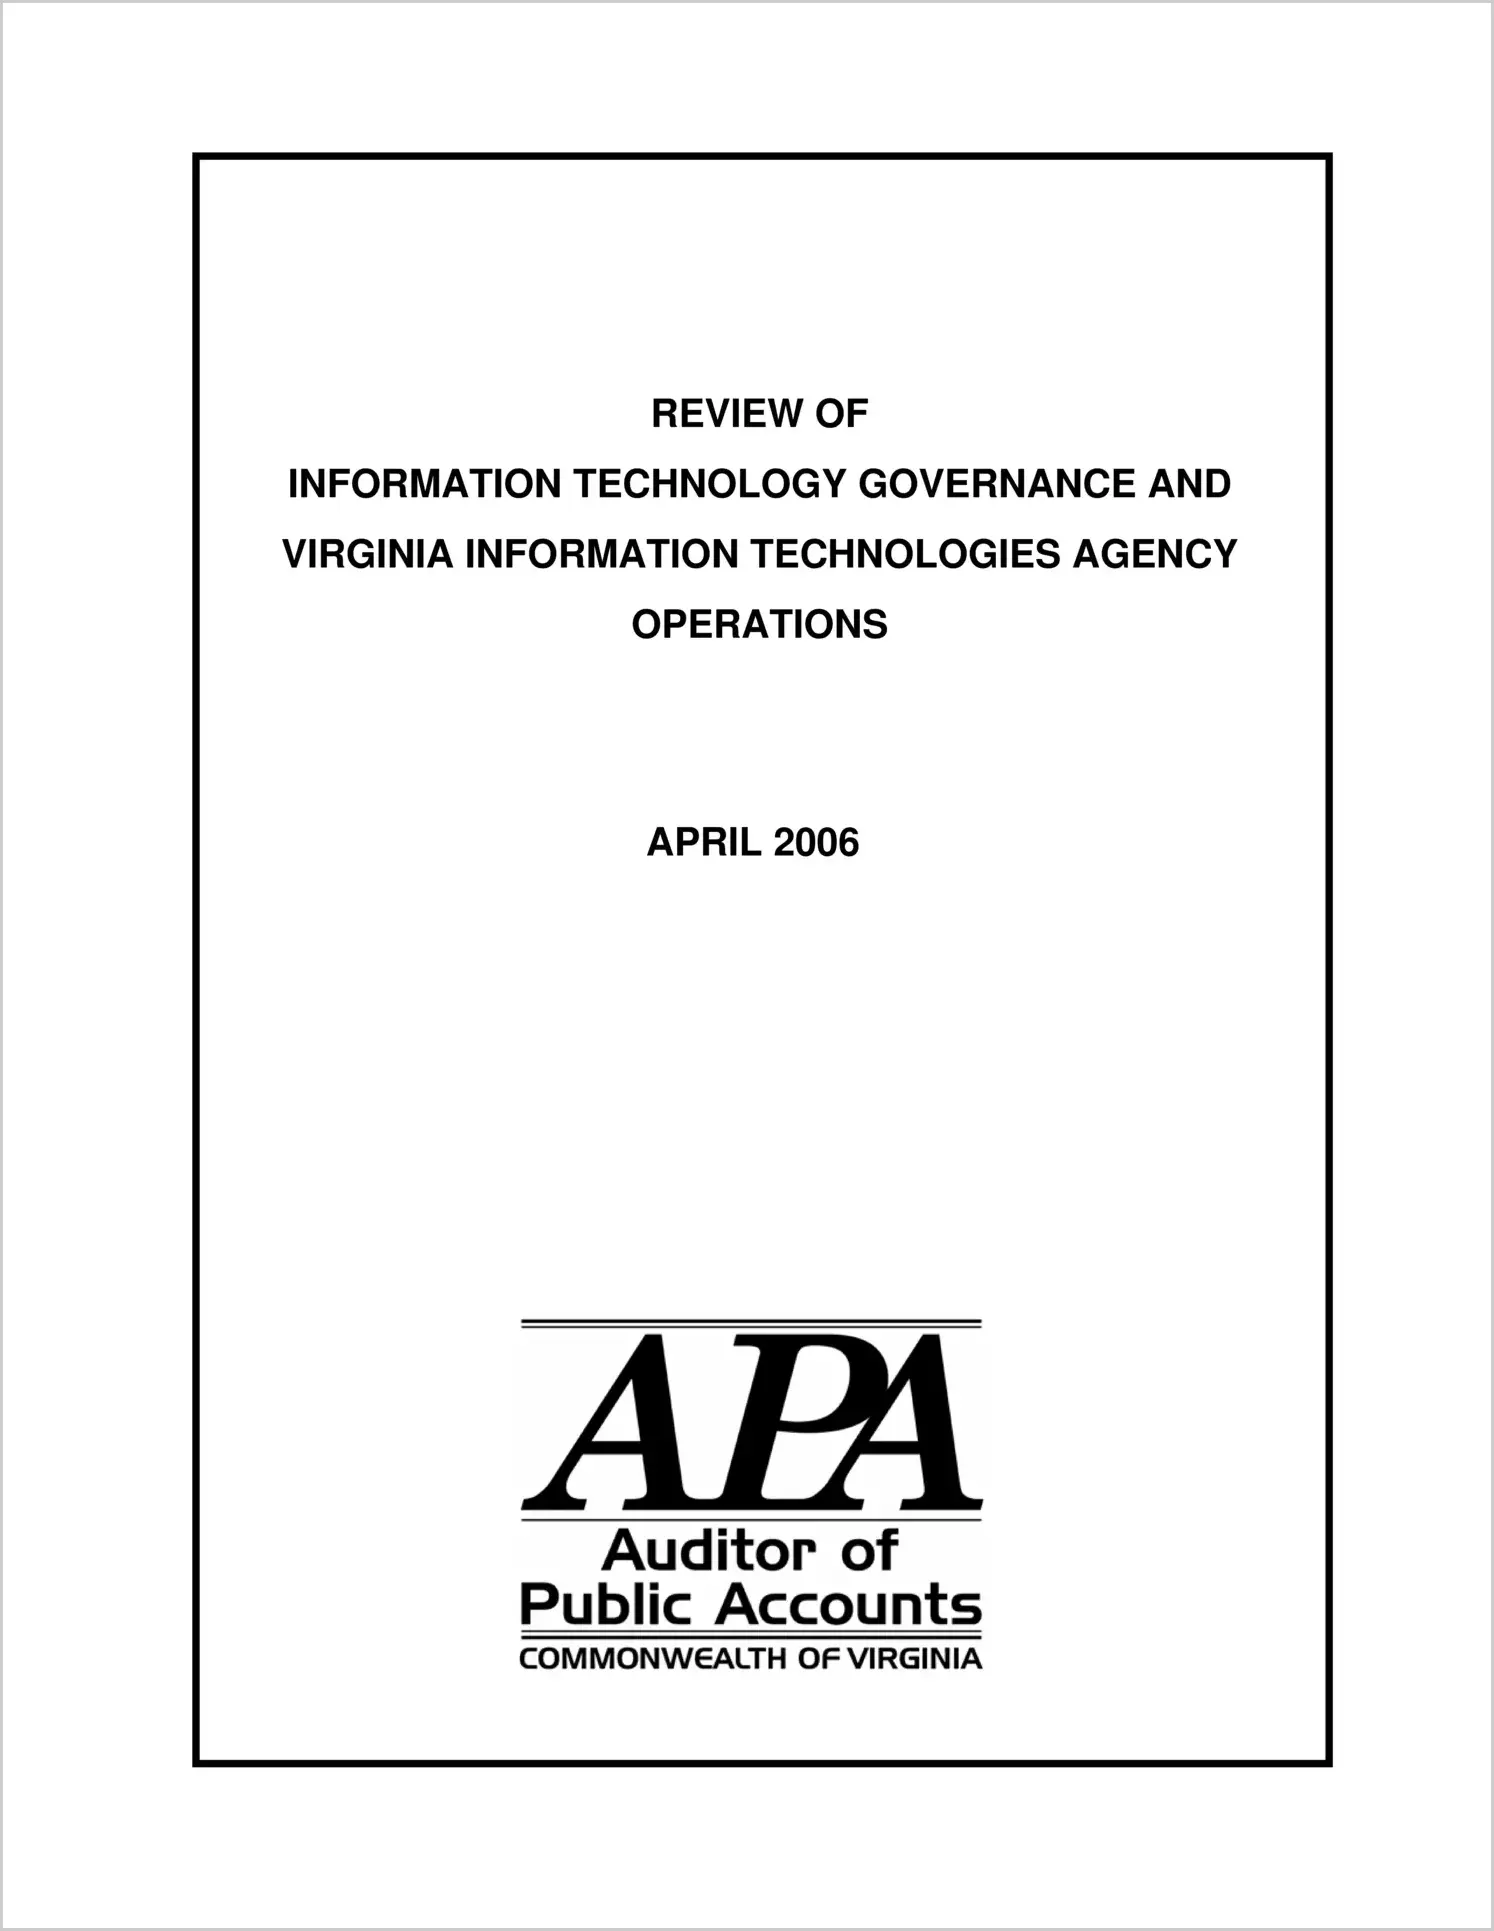 Review of Information Technology Governance and Virginia Information Technologies Agency Operations April 2006